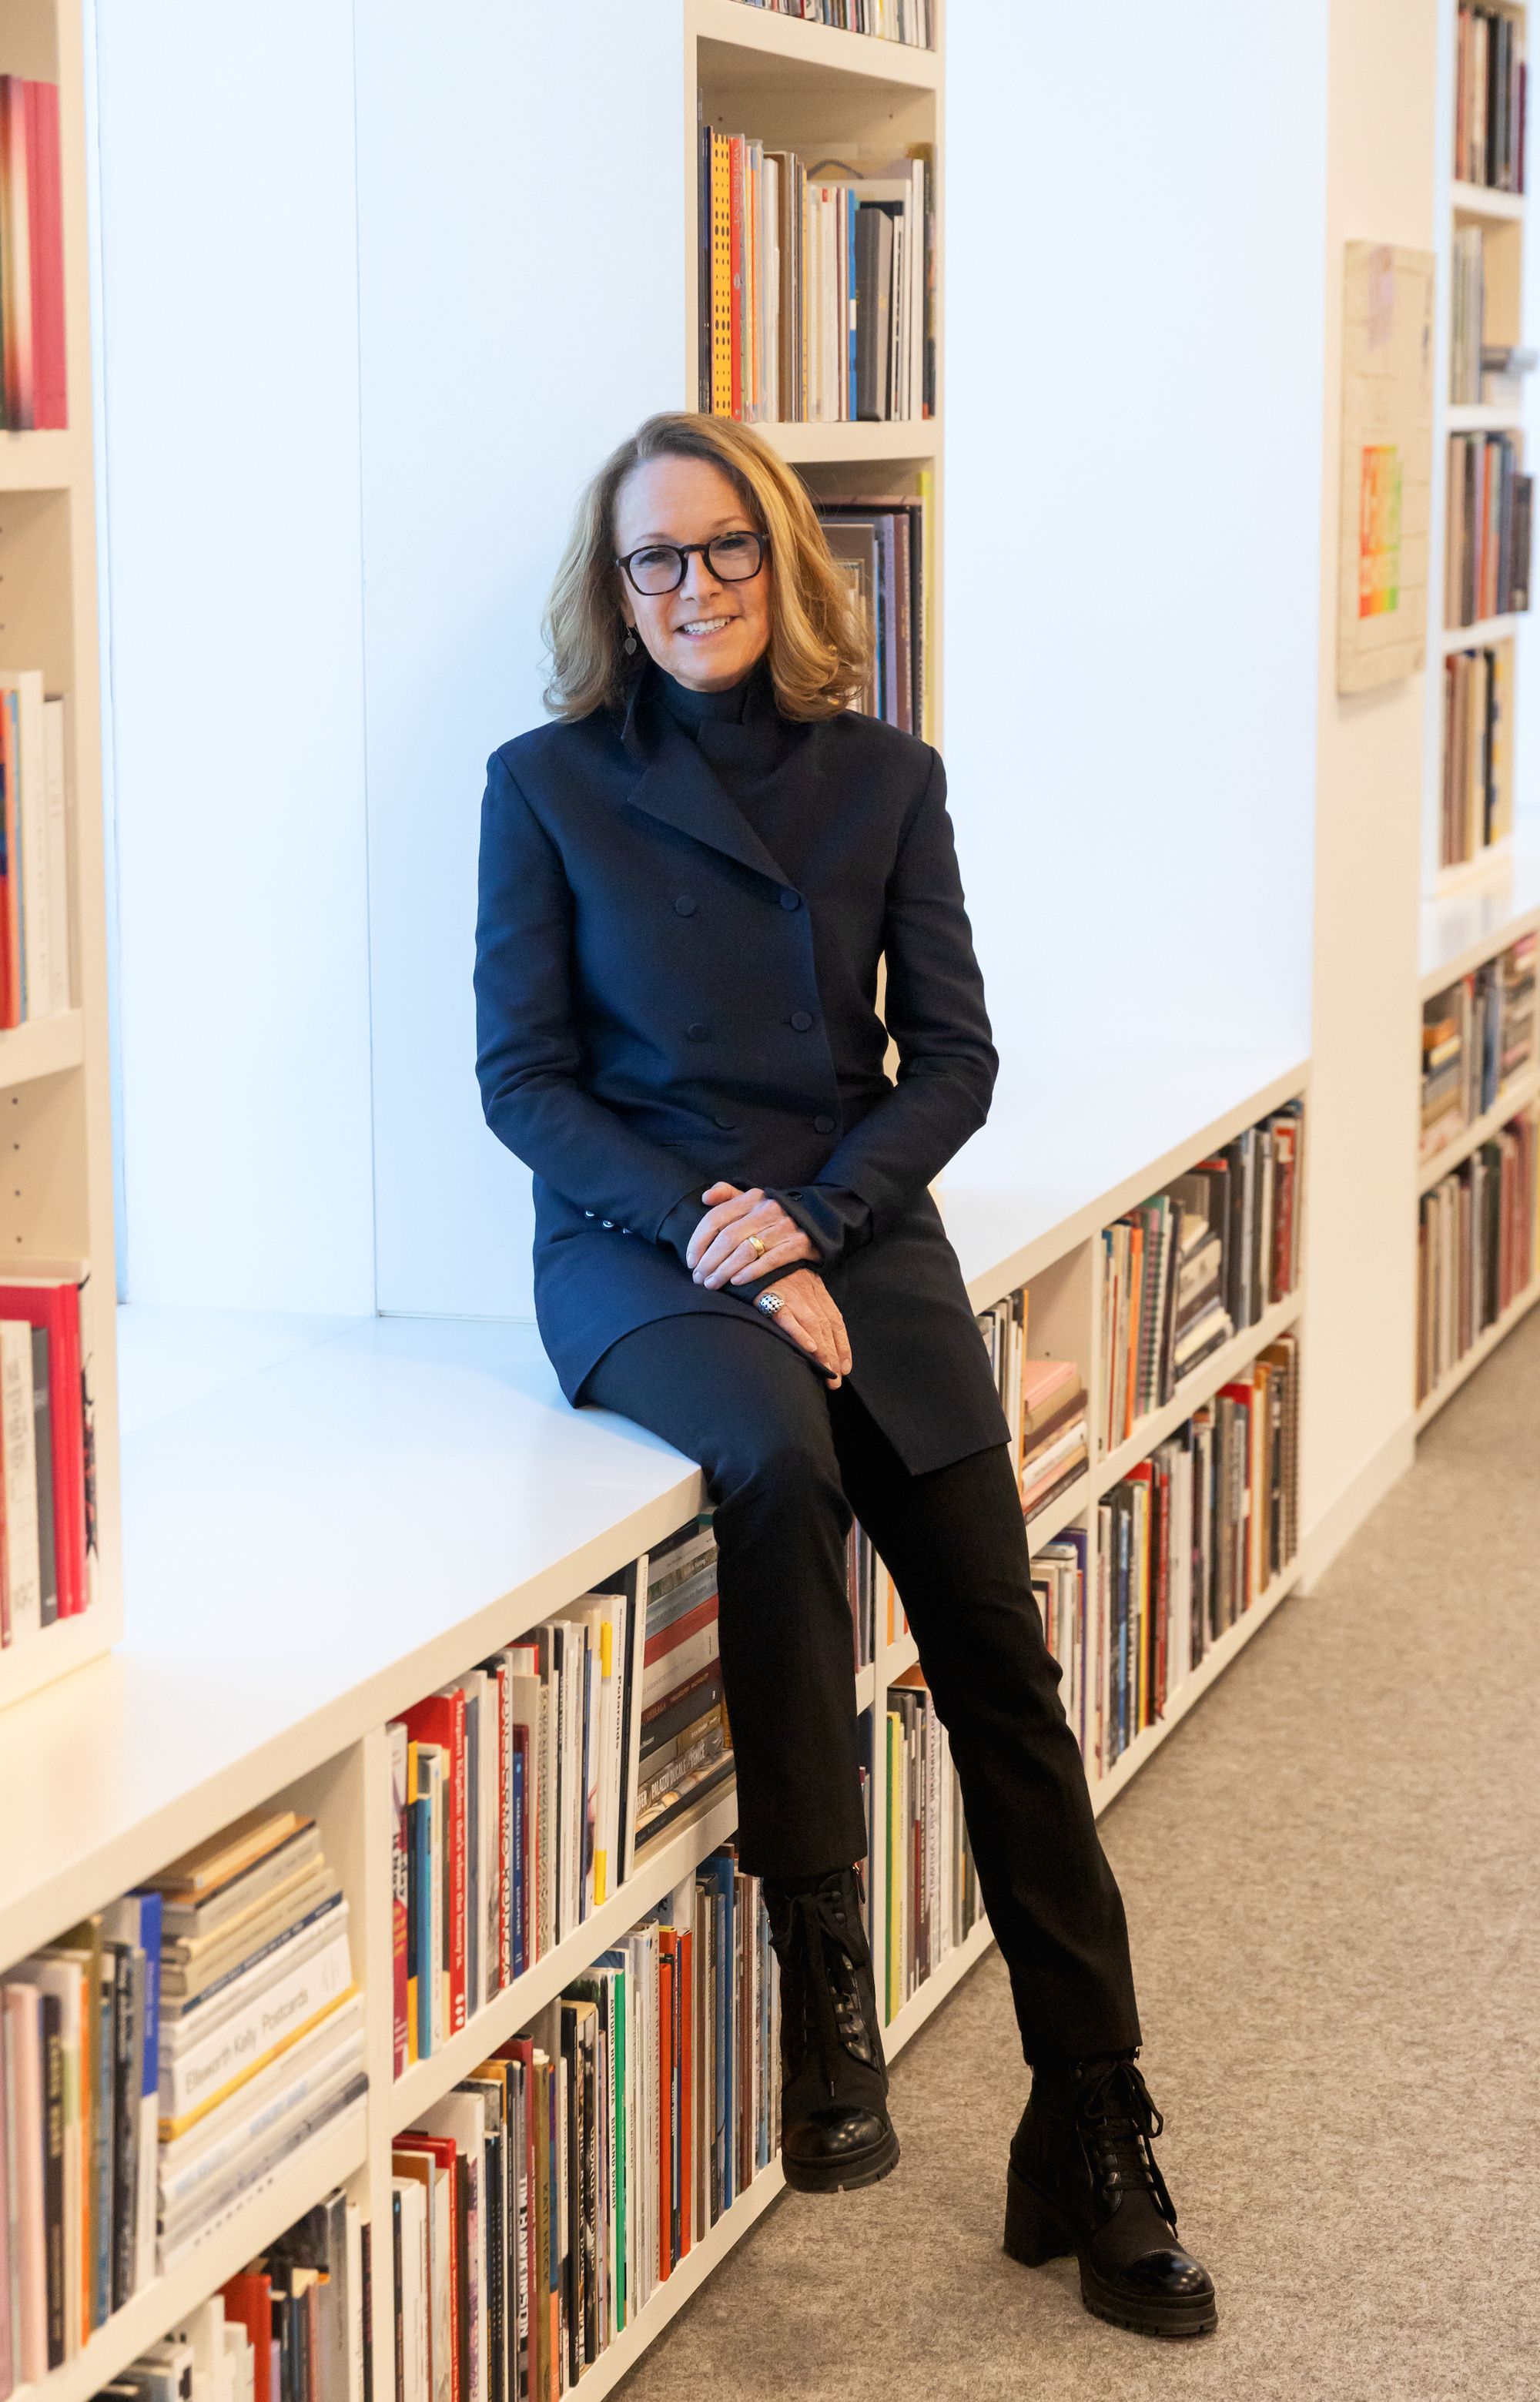 Hammer Museum director Ann Philbin to retire after 25 years